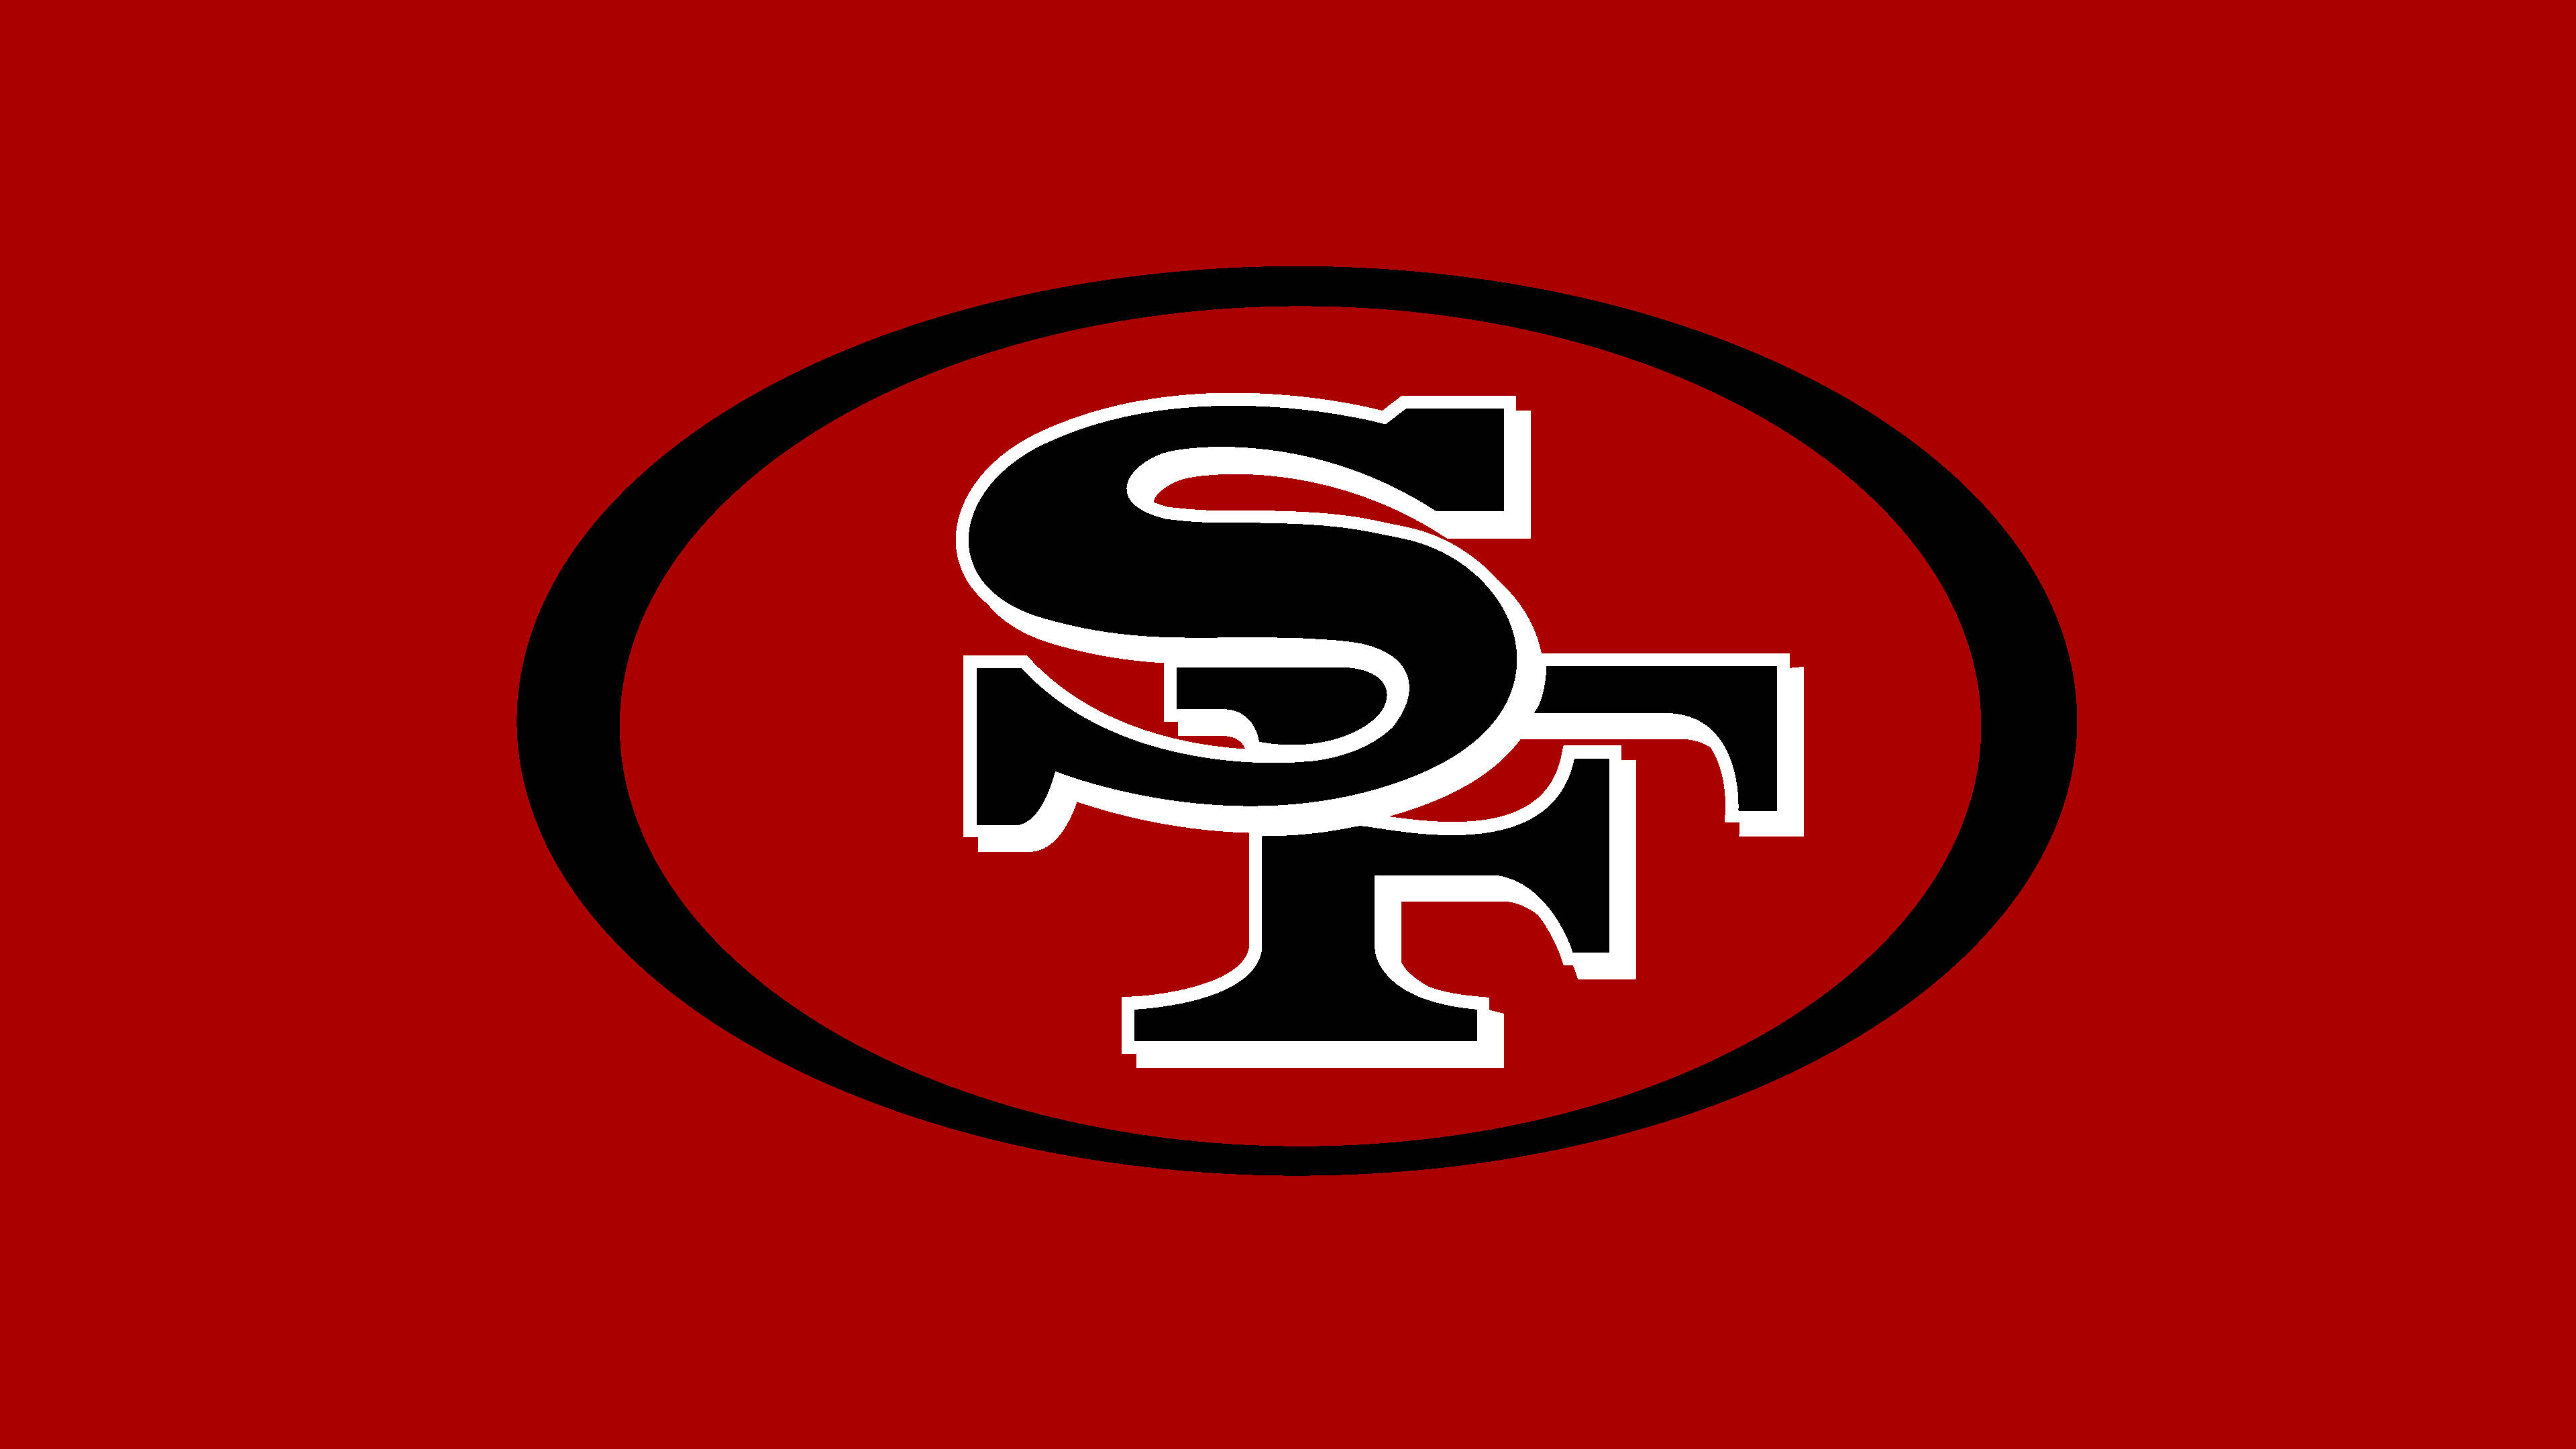 Download Sf 49ers Logo In Red Wallpaper